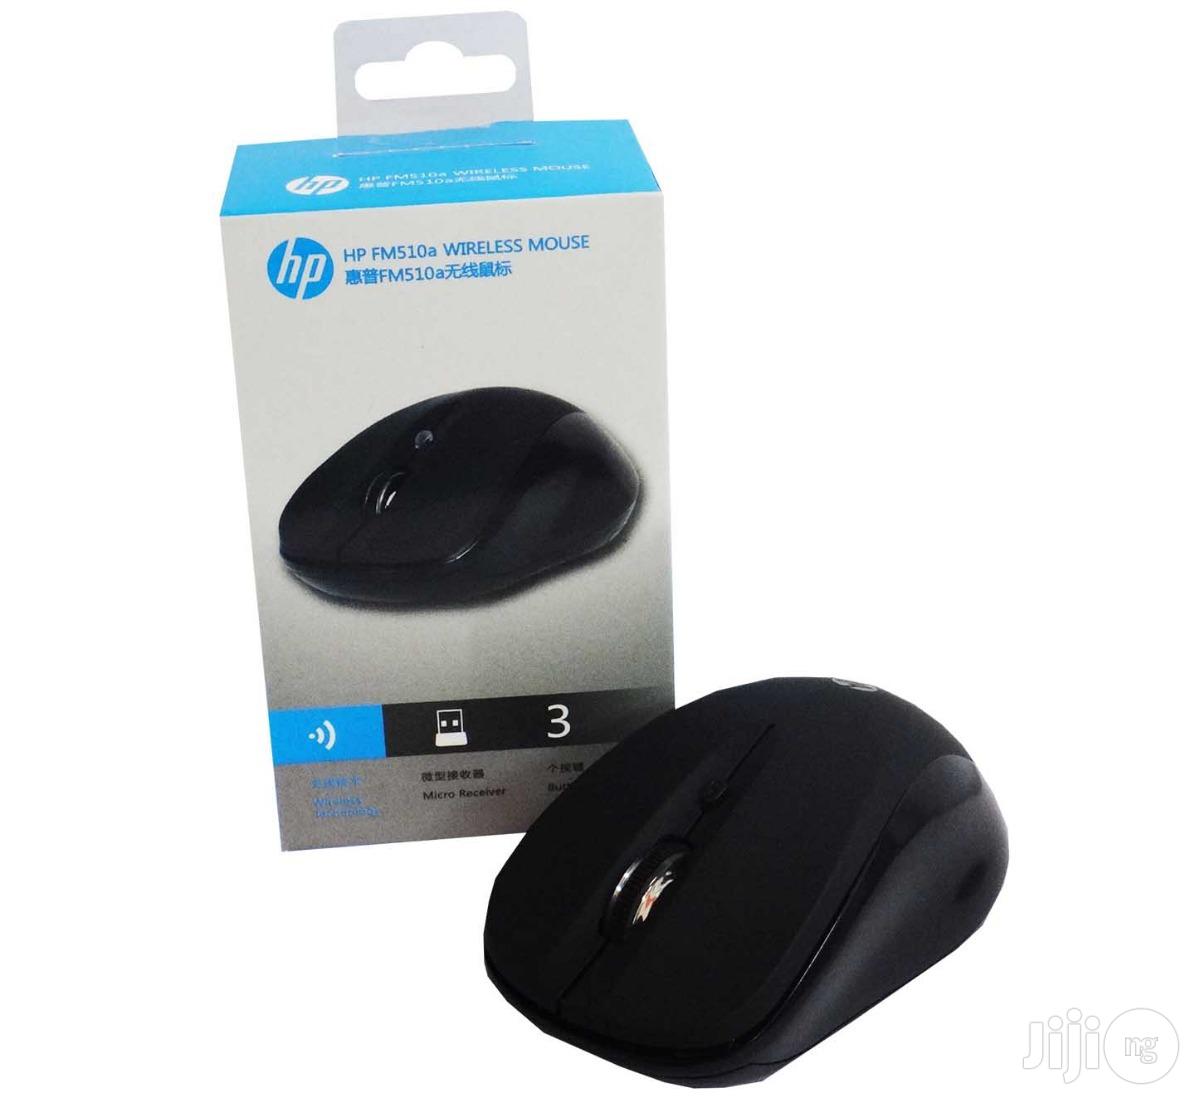 HP wireless mouse for pc & laptop – w l mouse fm 510 mice, keyboards & input device is manufactured by hp. * Model number : w/l mouse hp fm 510